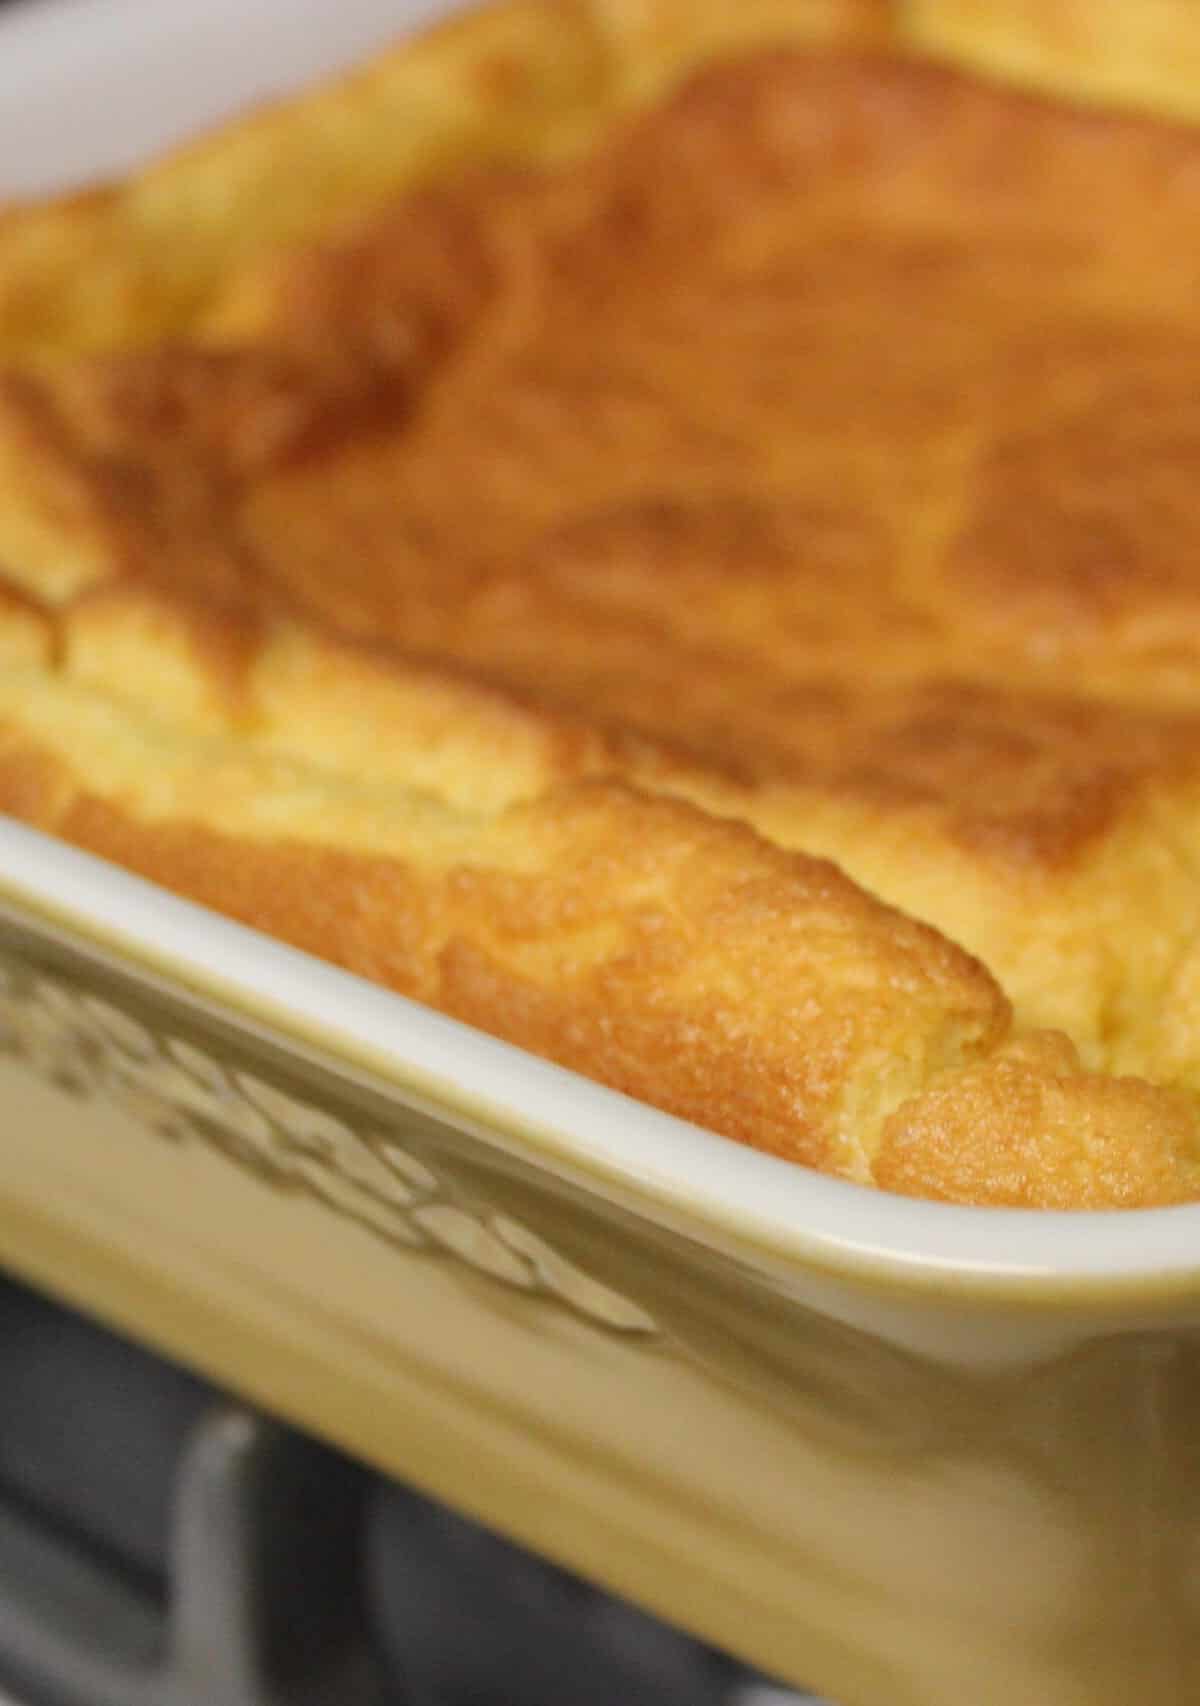  A cast-iron skillet filled with spoon bread batter ready to bake